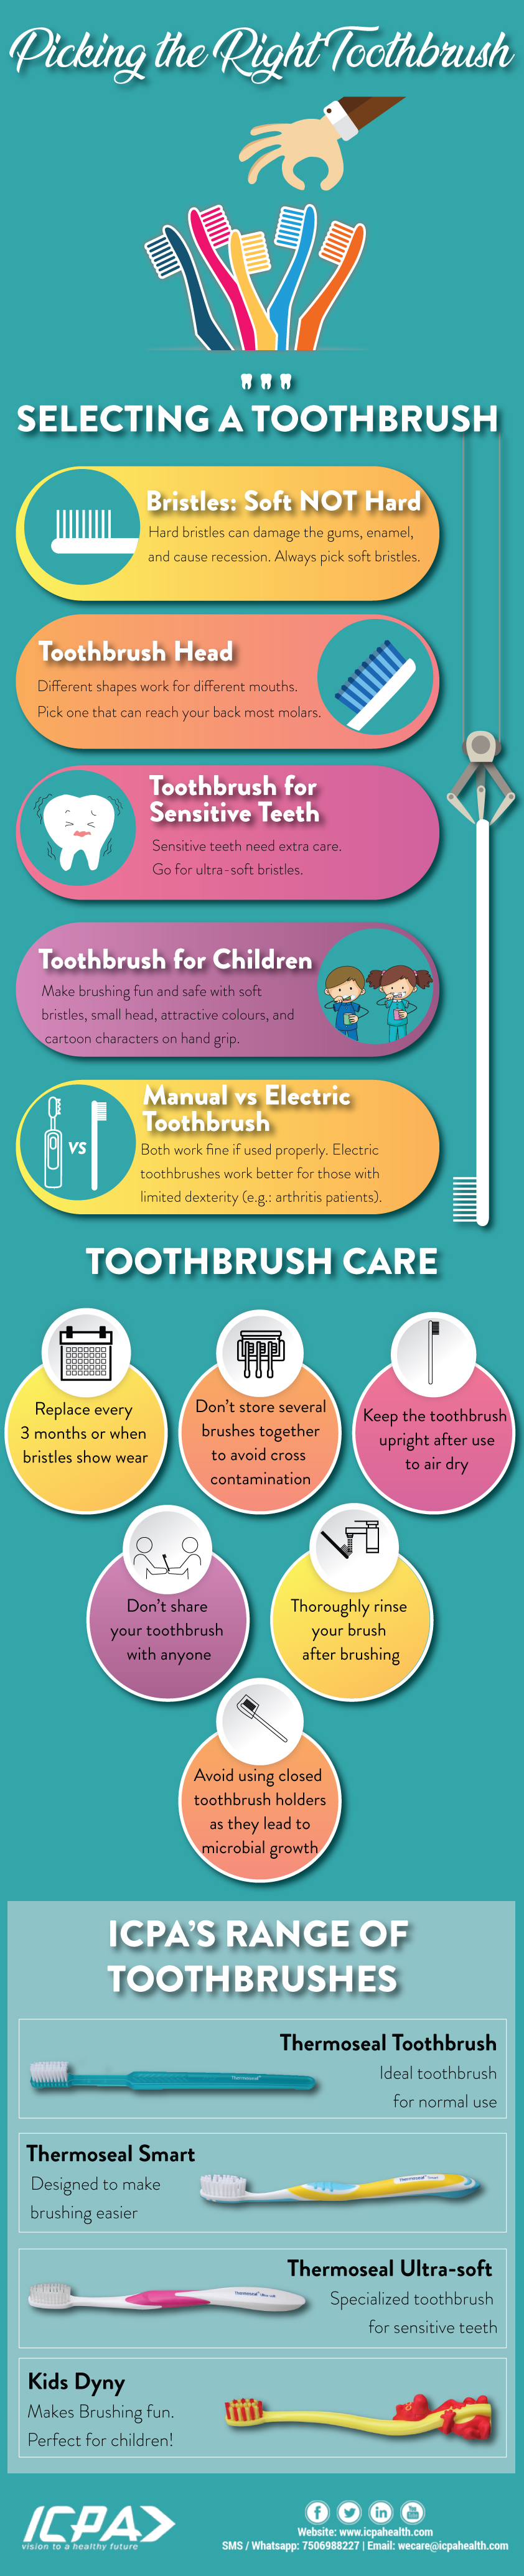 How to choose your Toothbrush [Infographic]